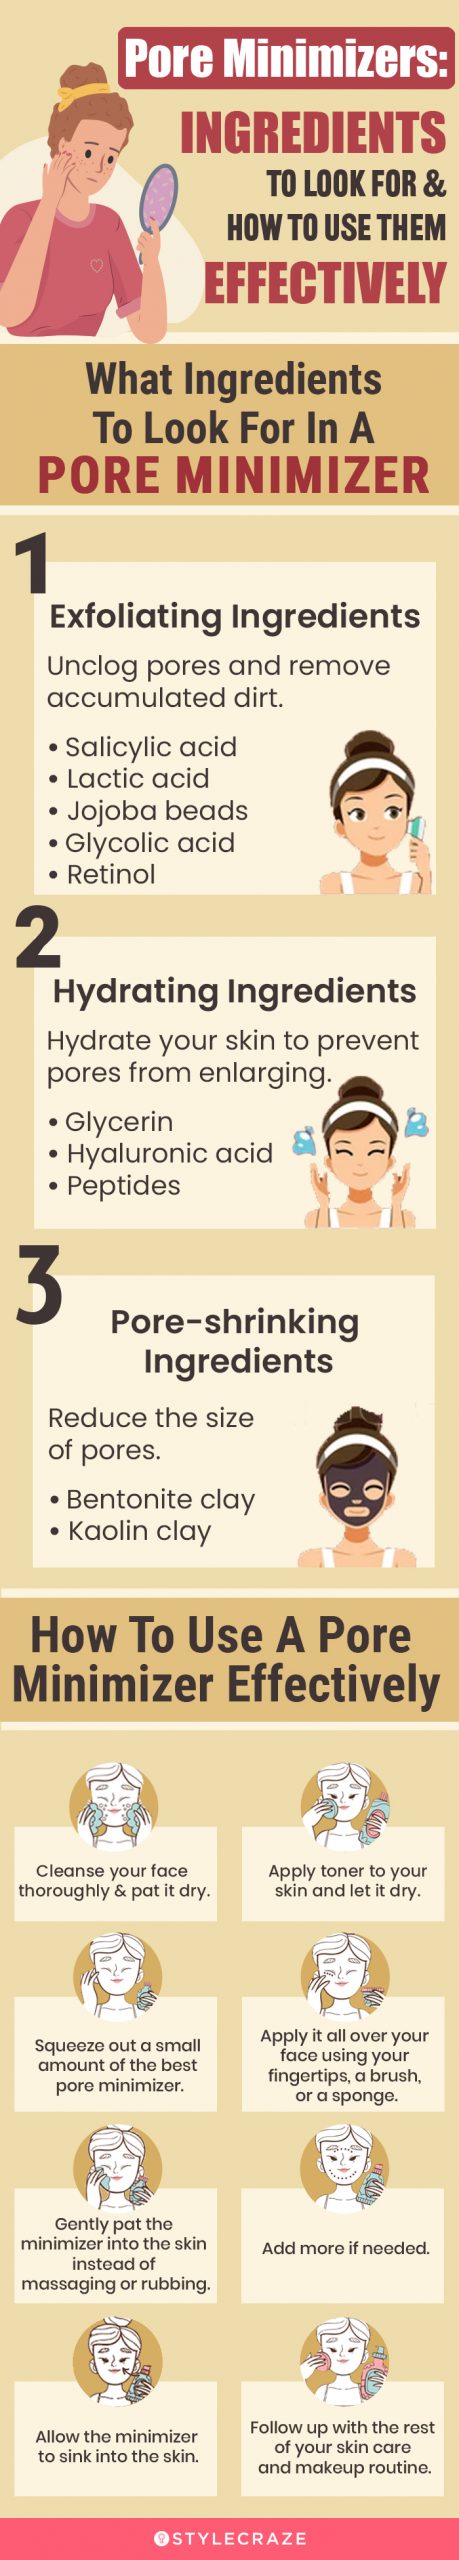 How To Use Pore Minimizer Effectively